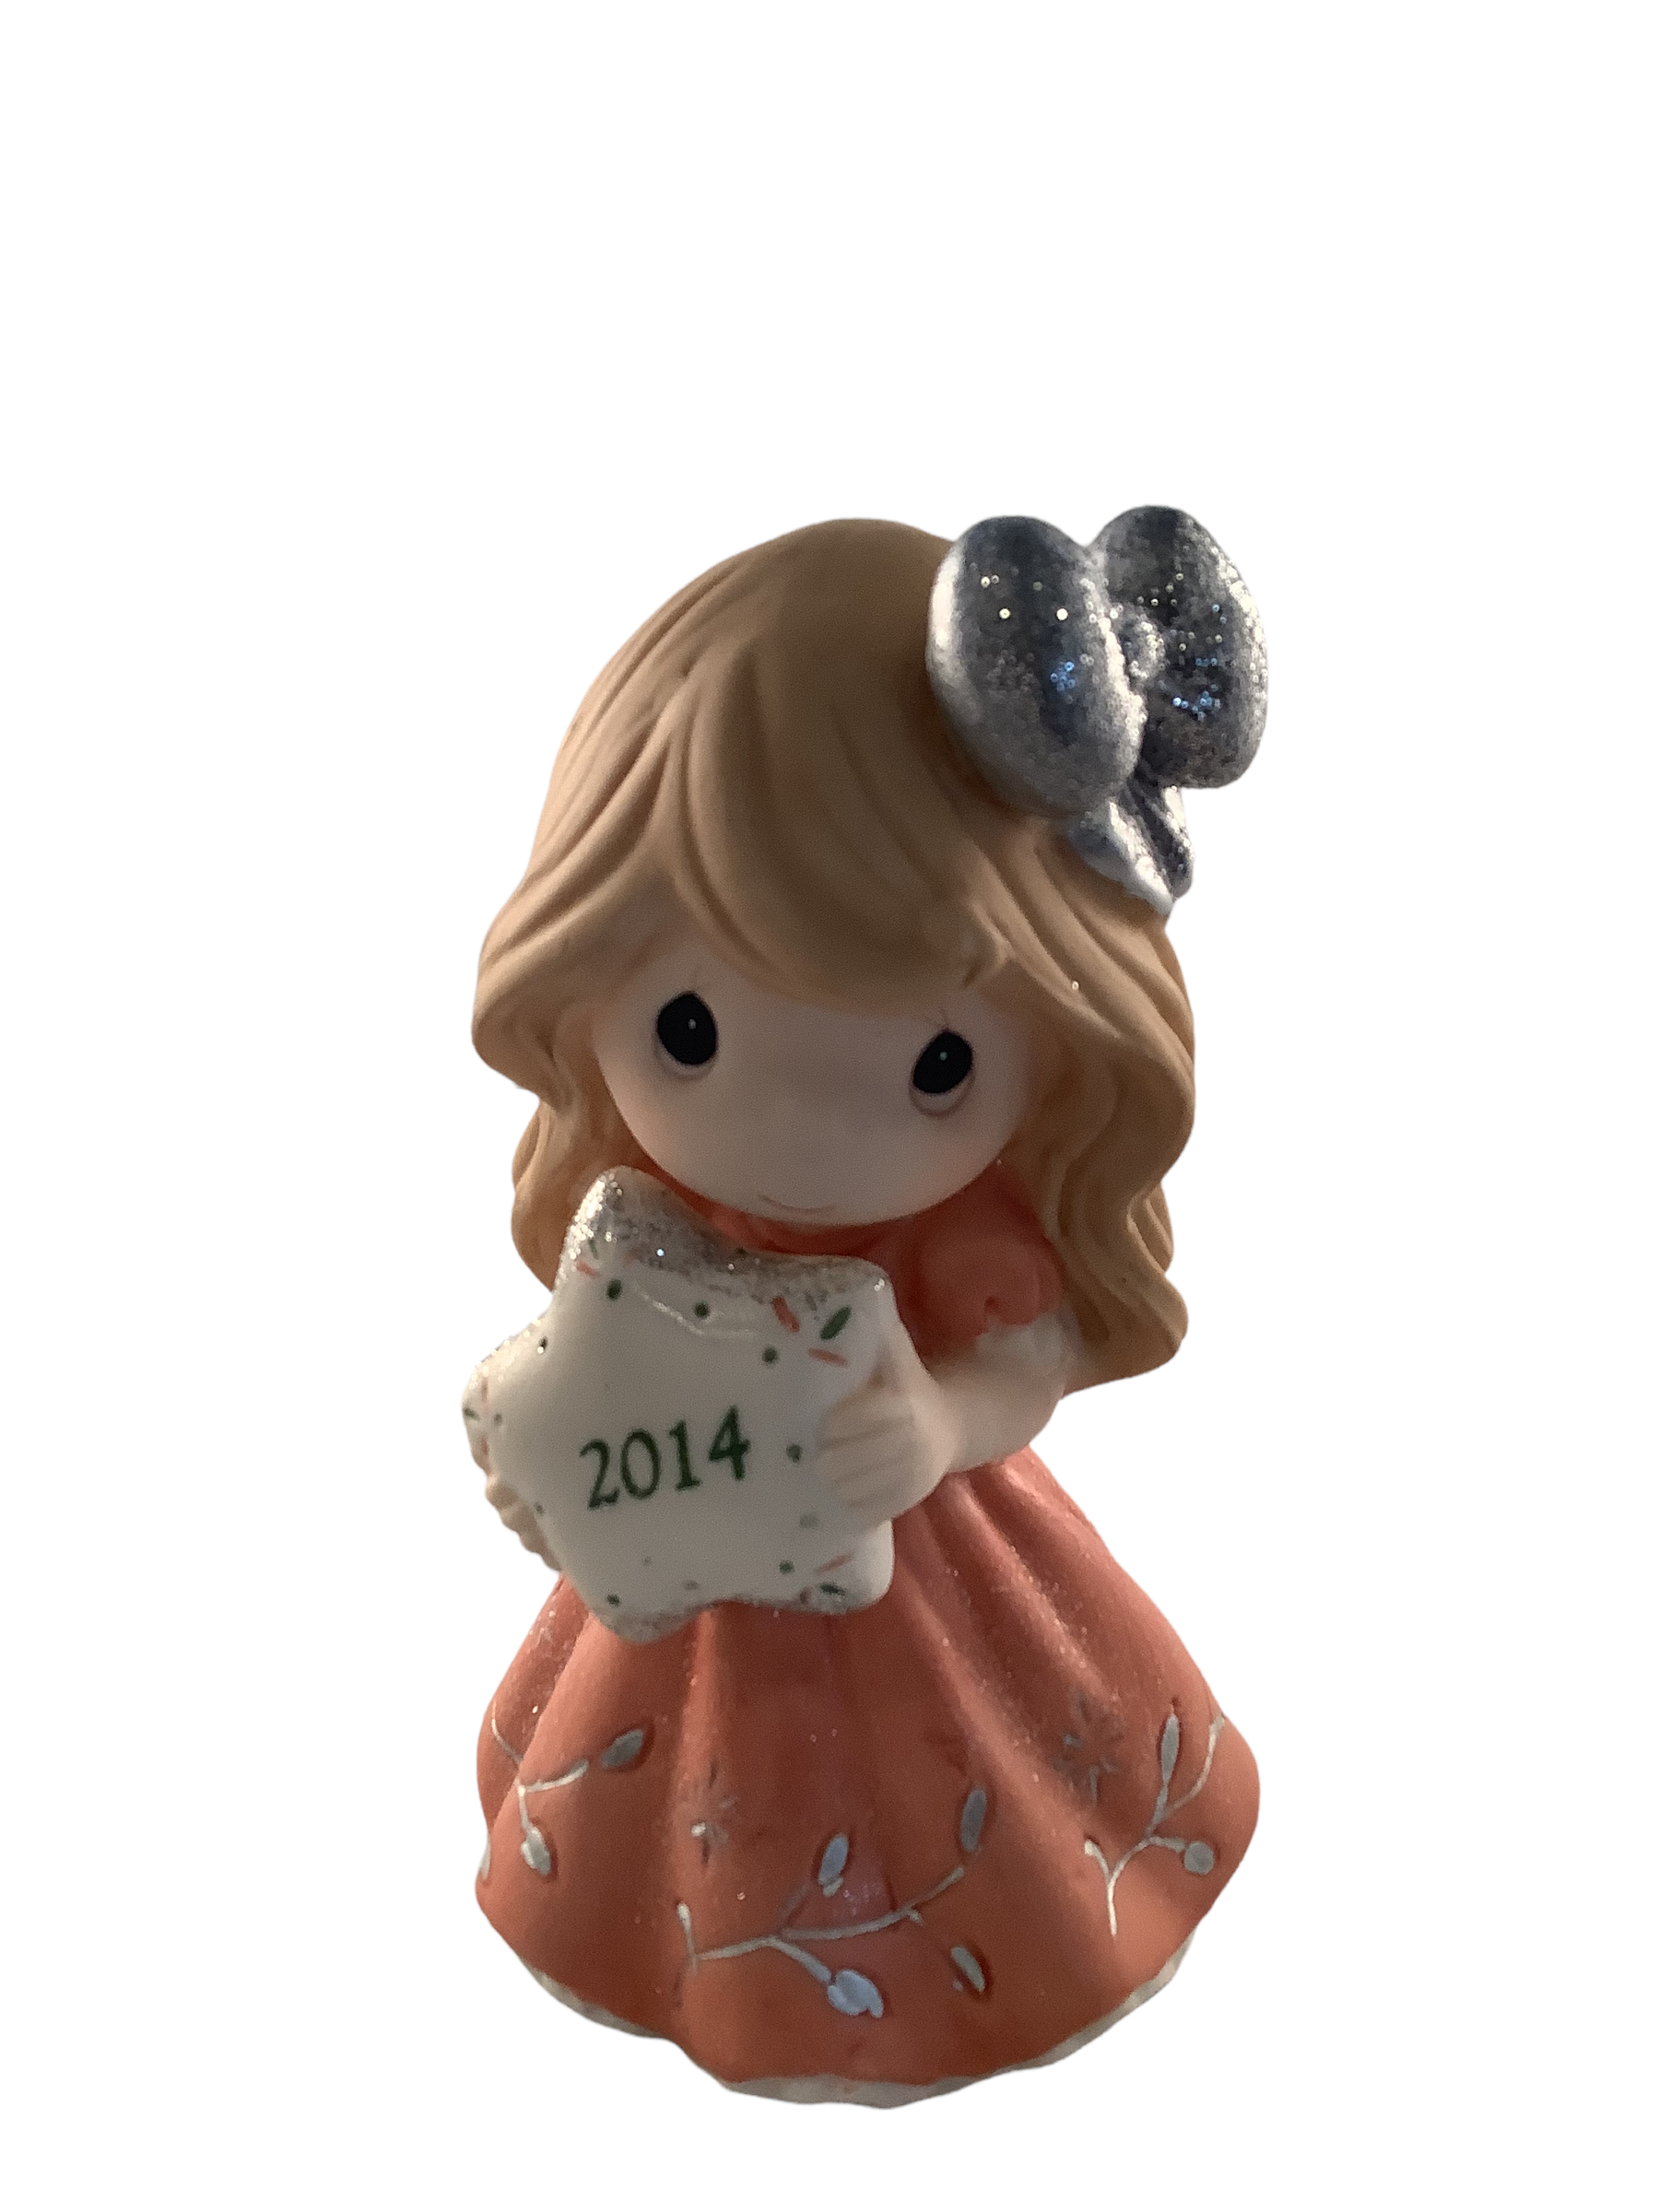 May Your Holiday Sparkle - 2014 Dated Annual Precious Moment Figurine